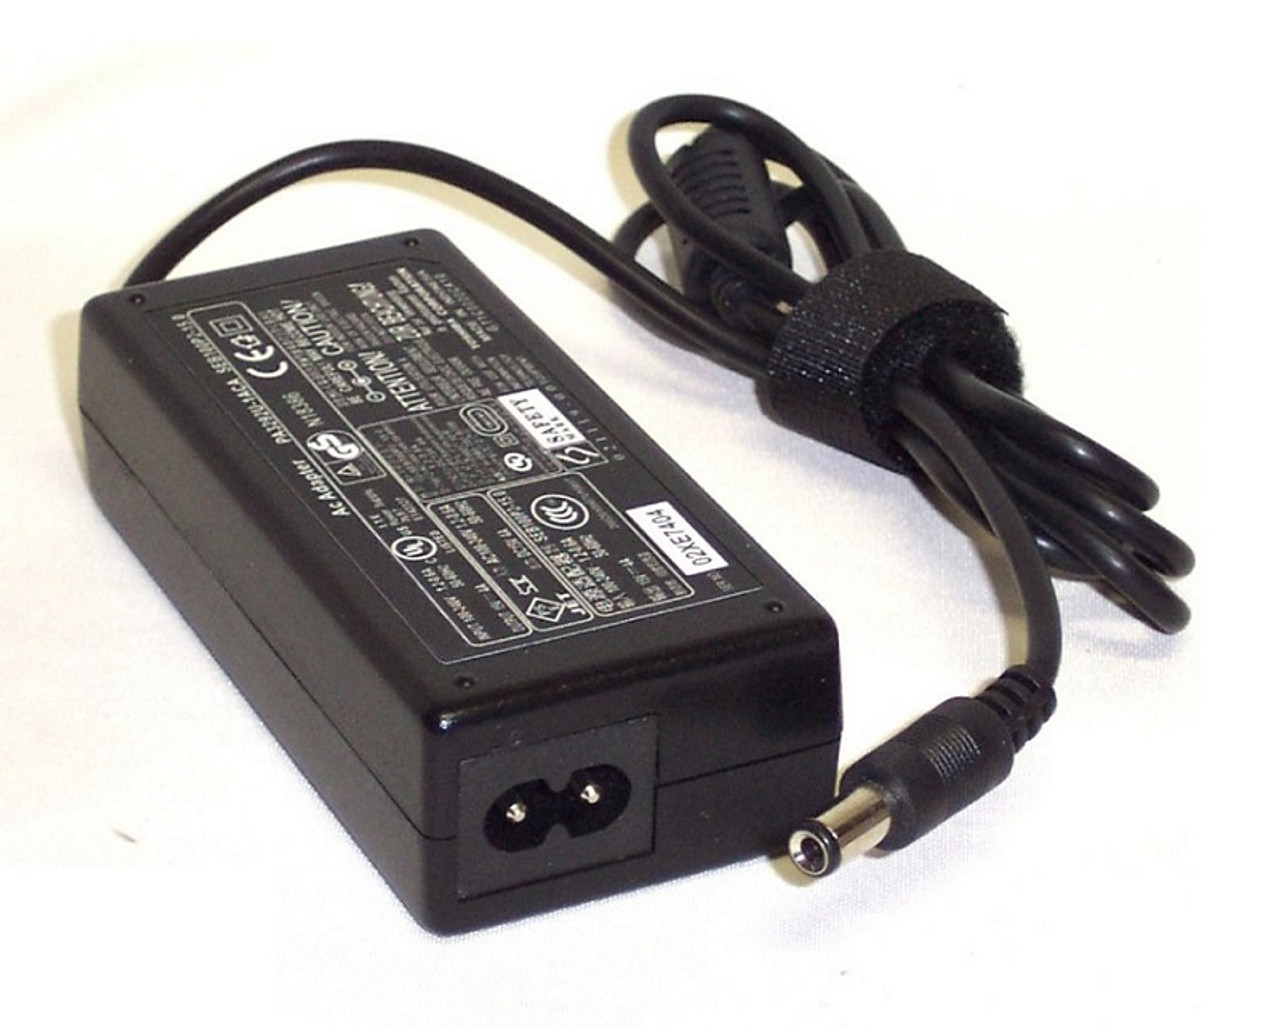 PPP009C - HP 65-Watts AC Adapter for G42